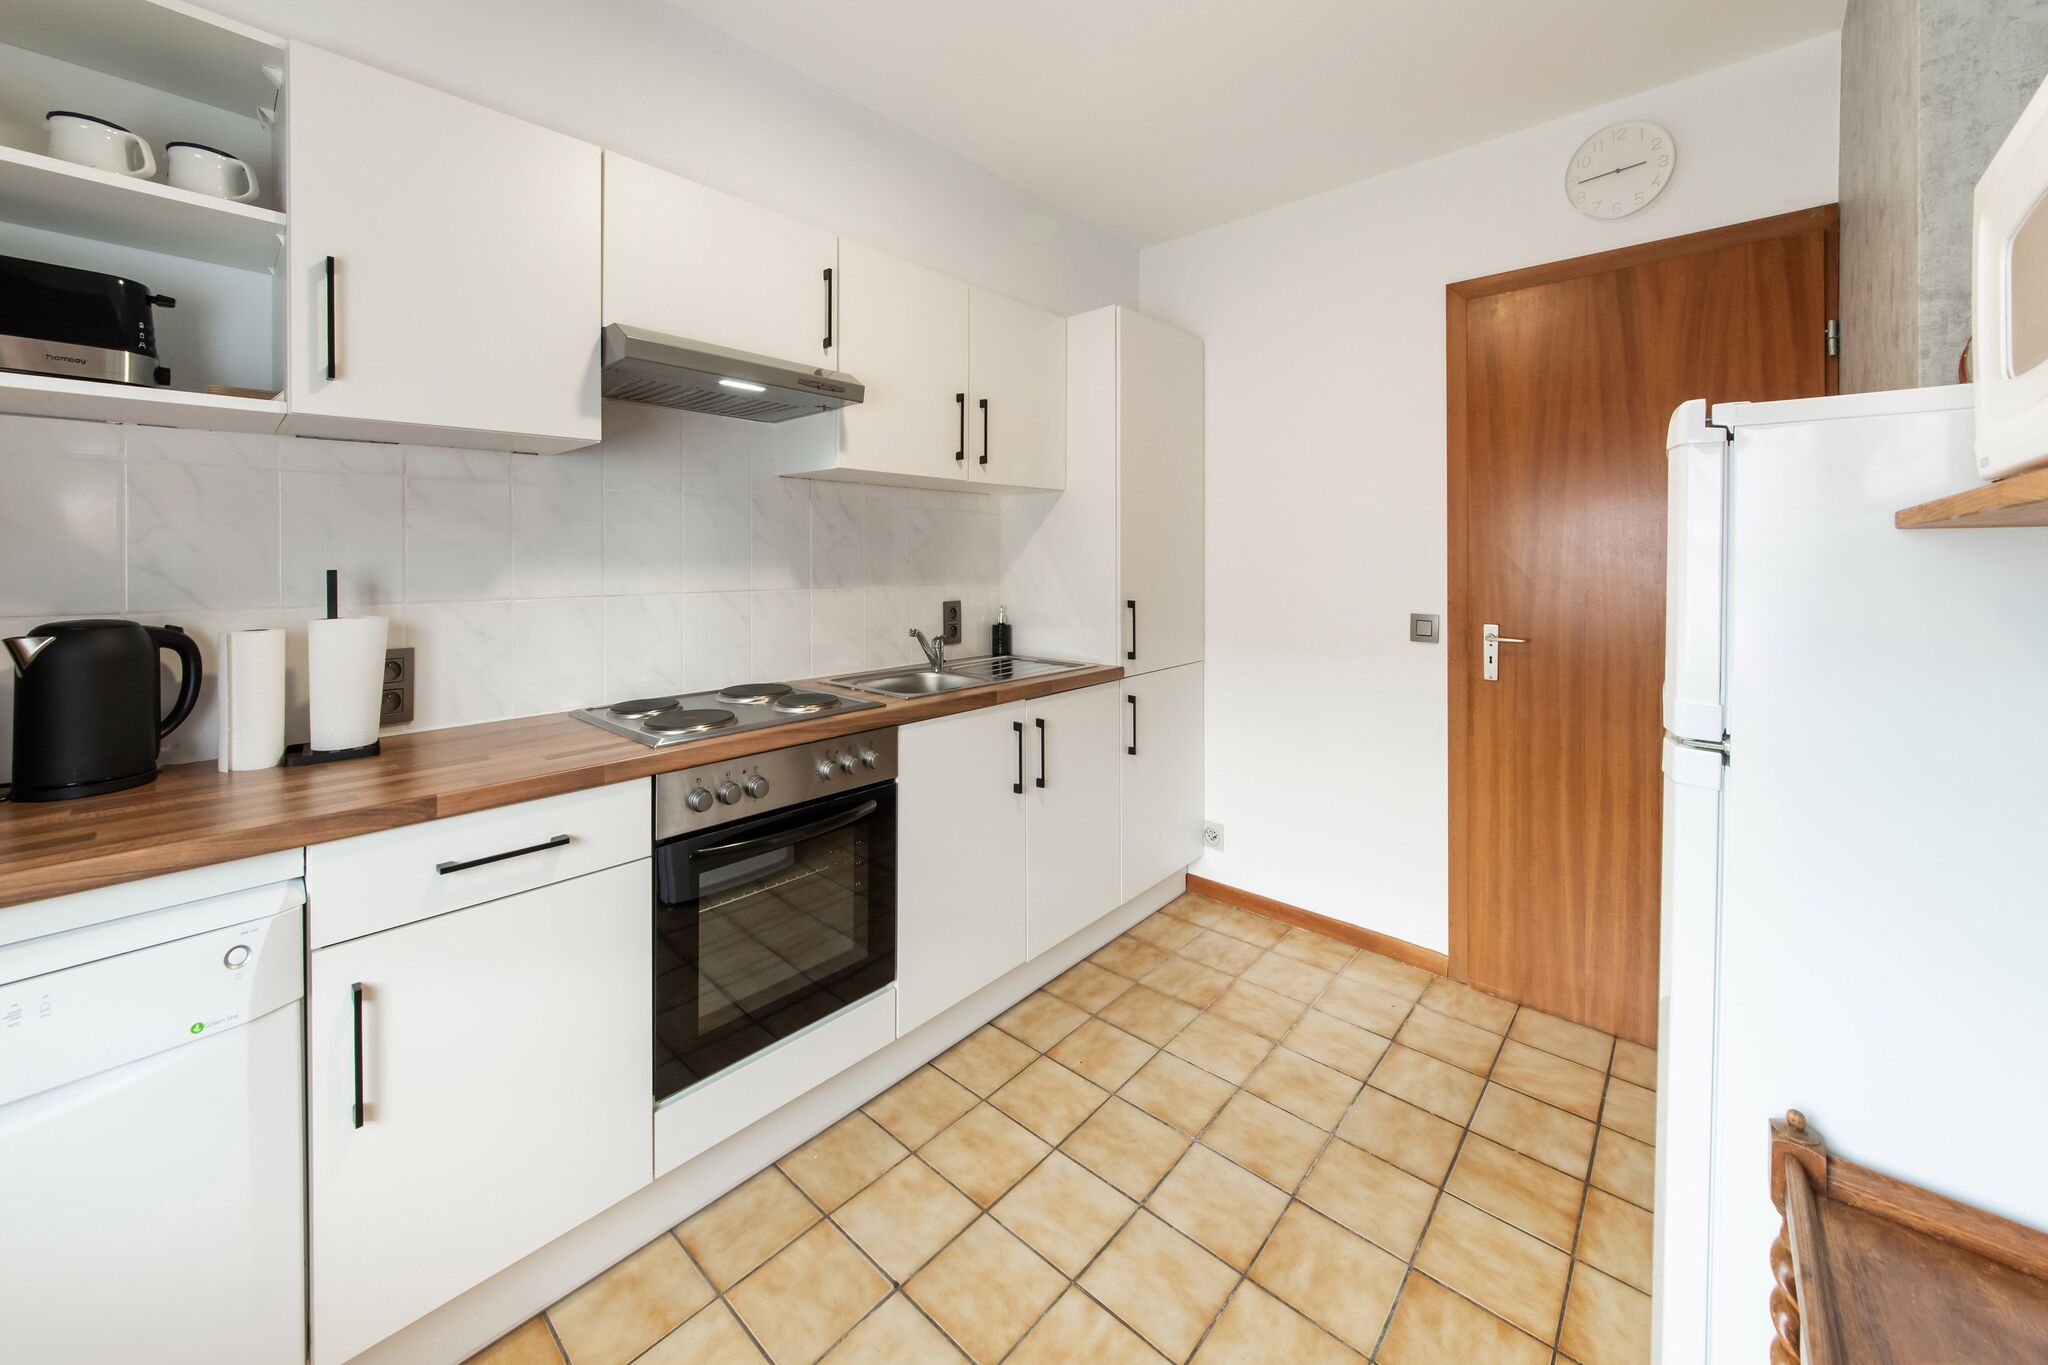 The Inseparable - beautiful apartment for 7 adults in Malmedy